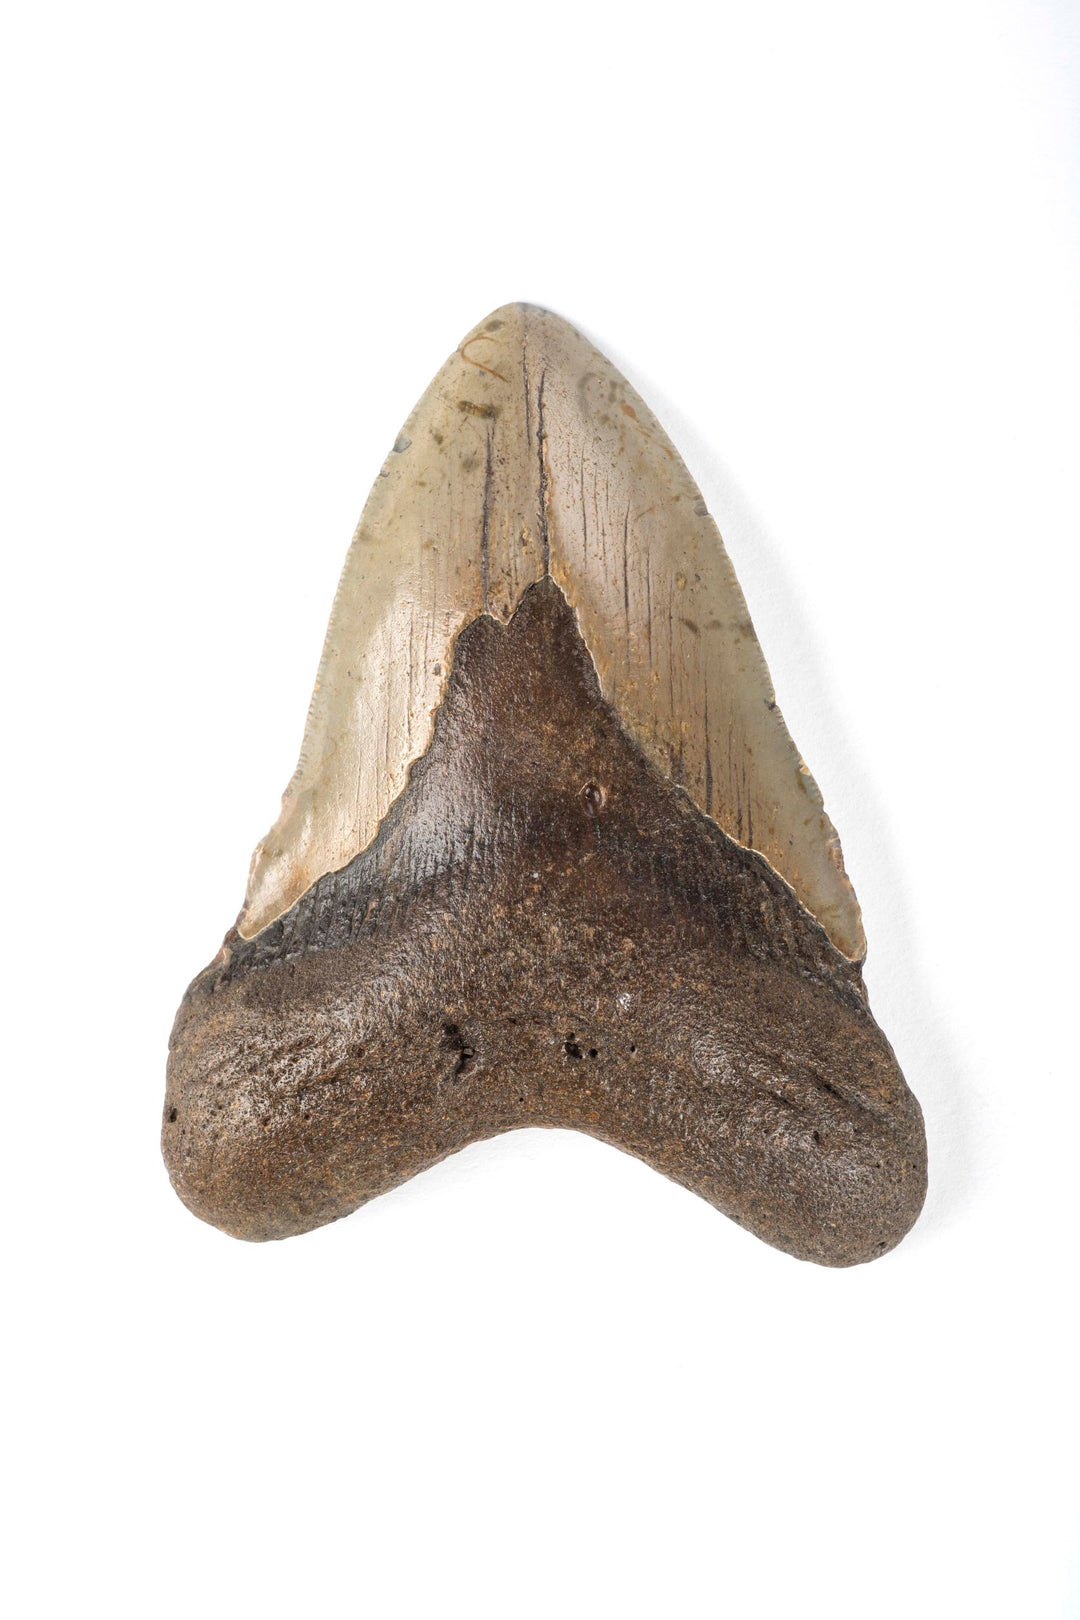 Megalodon Tooth- 4.5 Inches